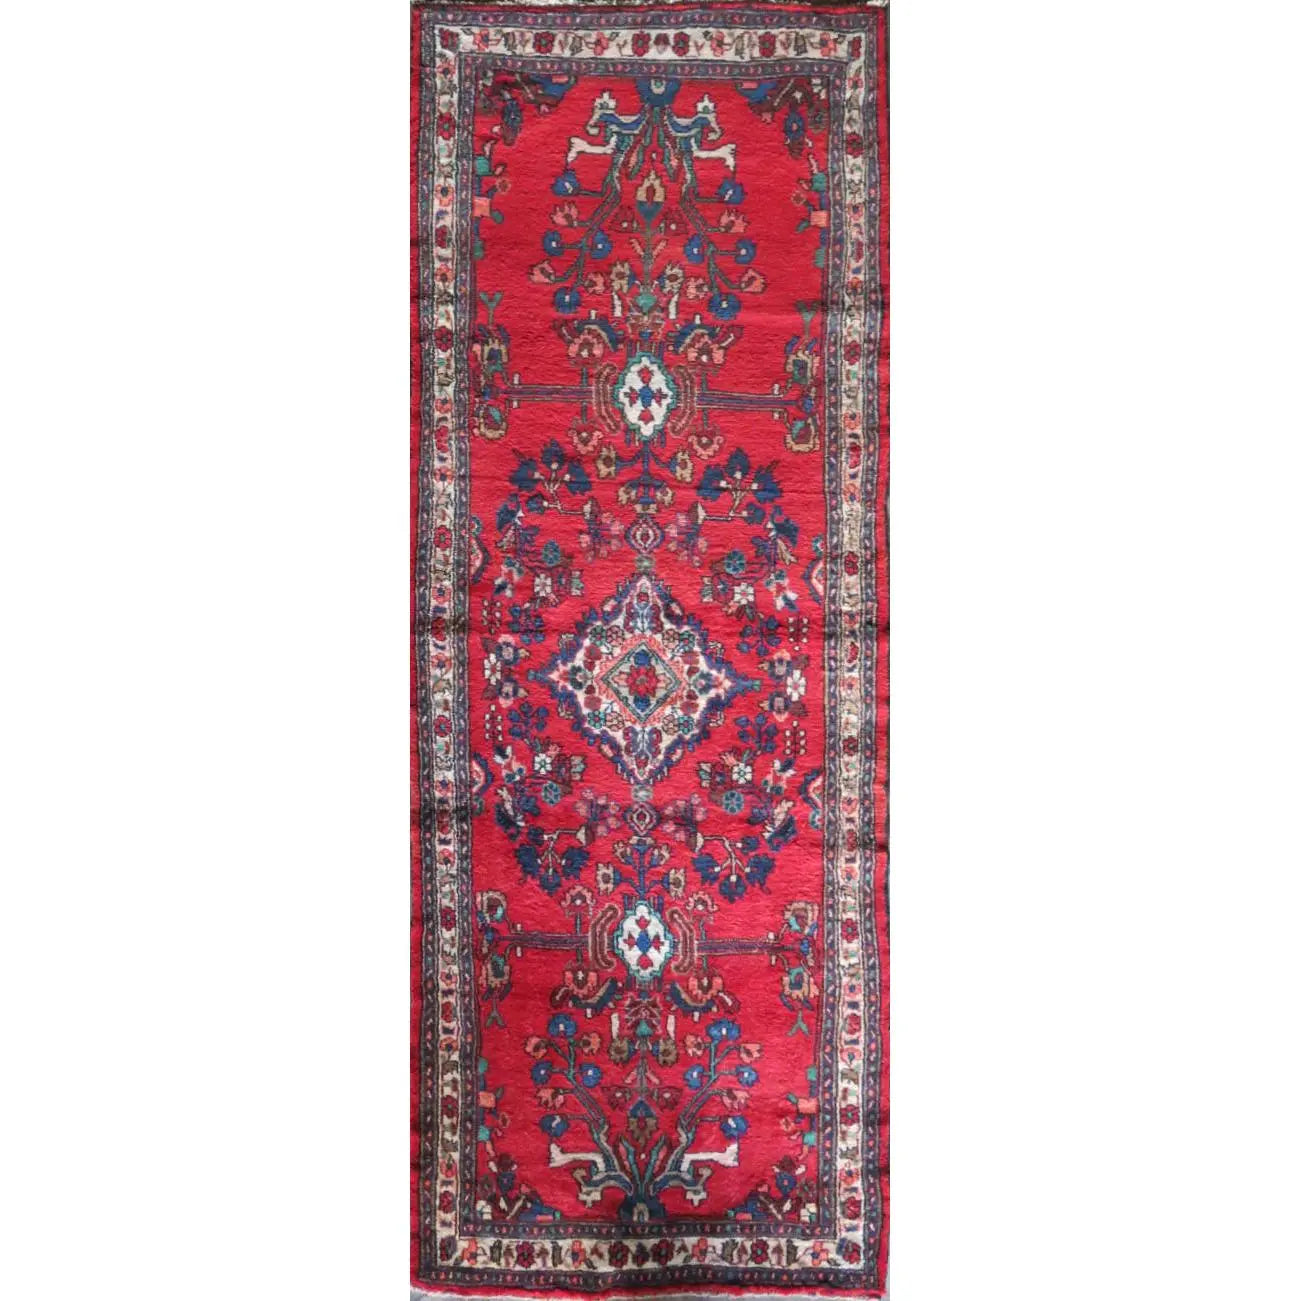 Hand-Knotted Persian Wool Rug _ Luxurious Vintage Design, 10'5" x 3'6", Artisan Crafted